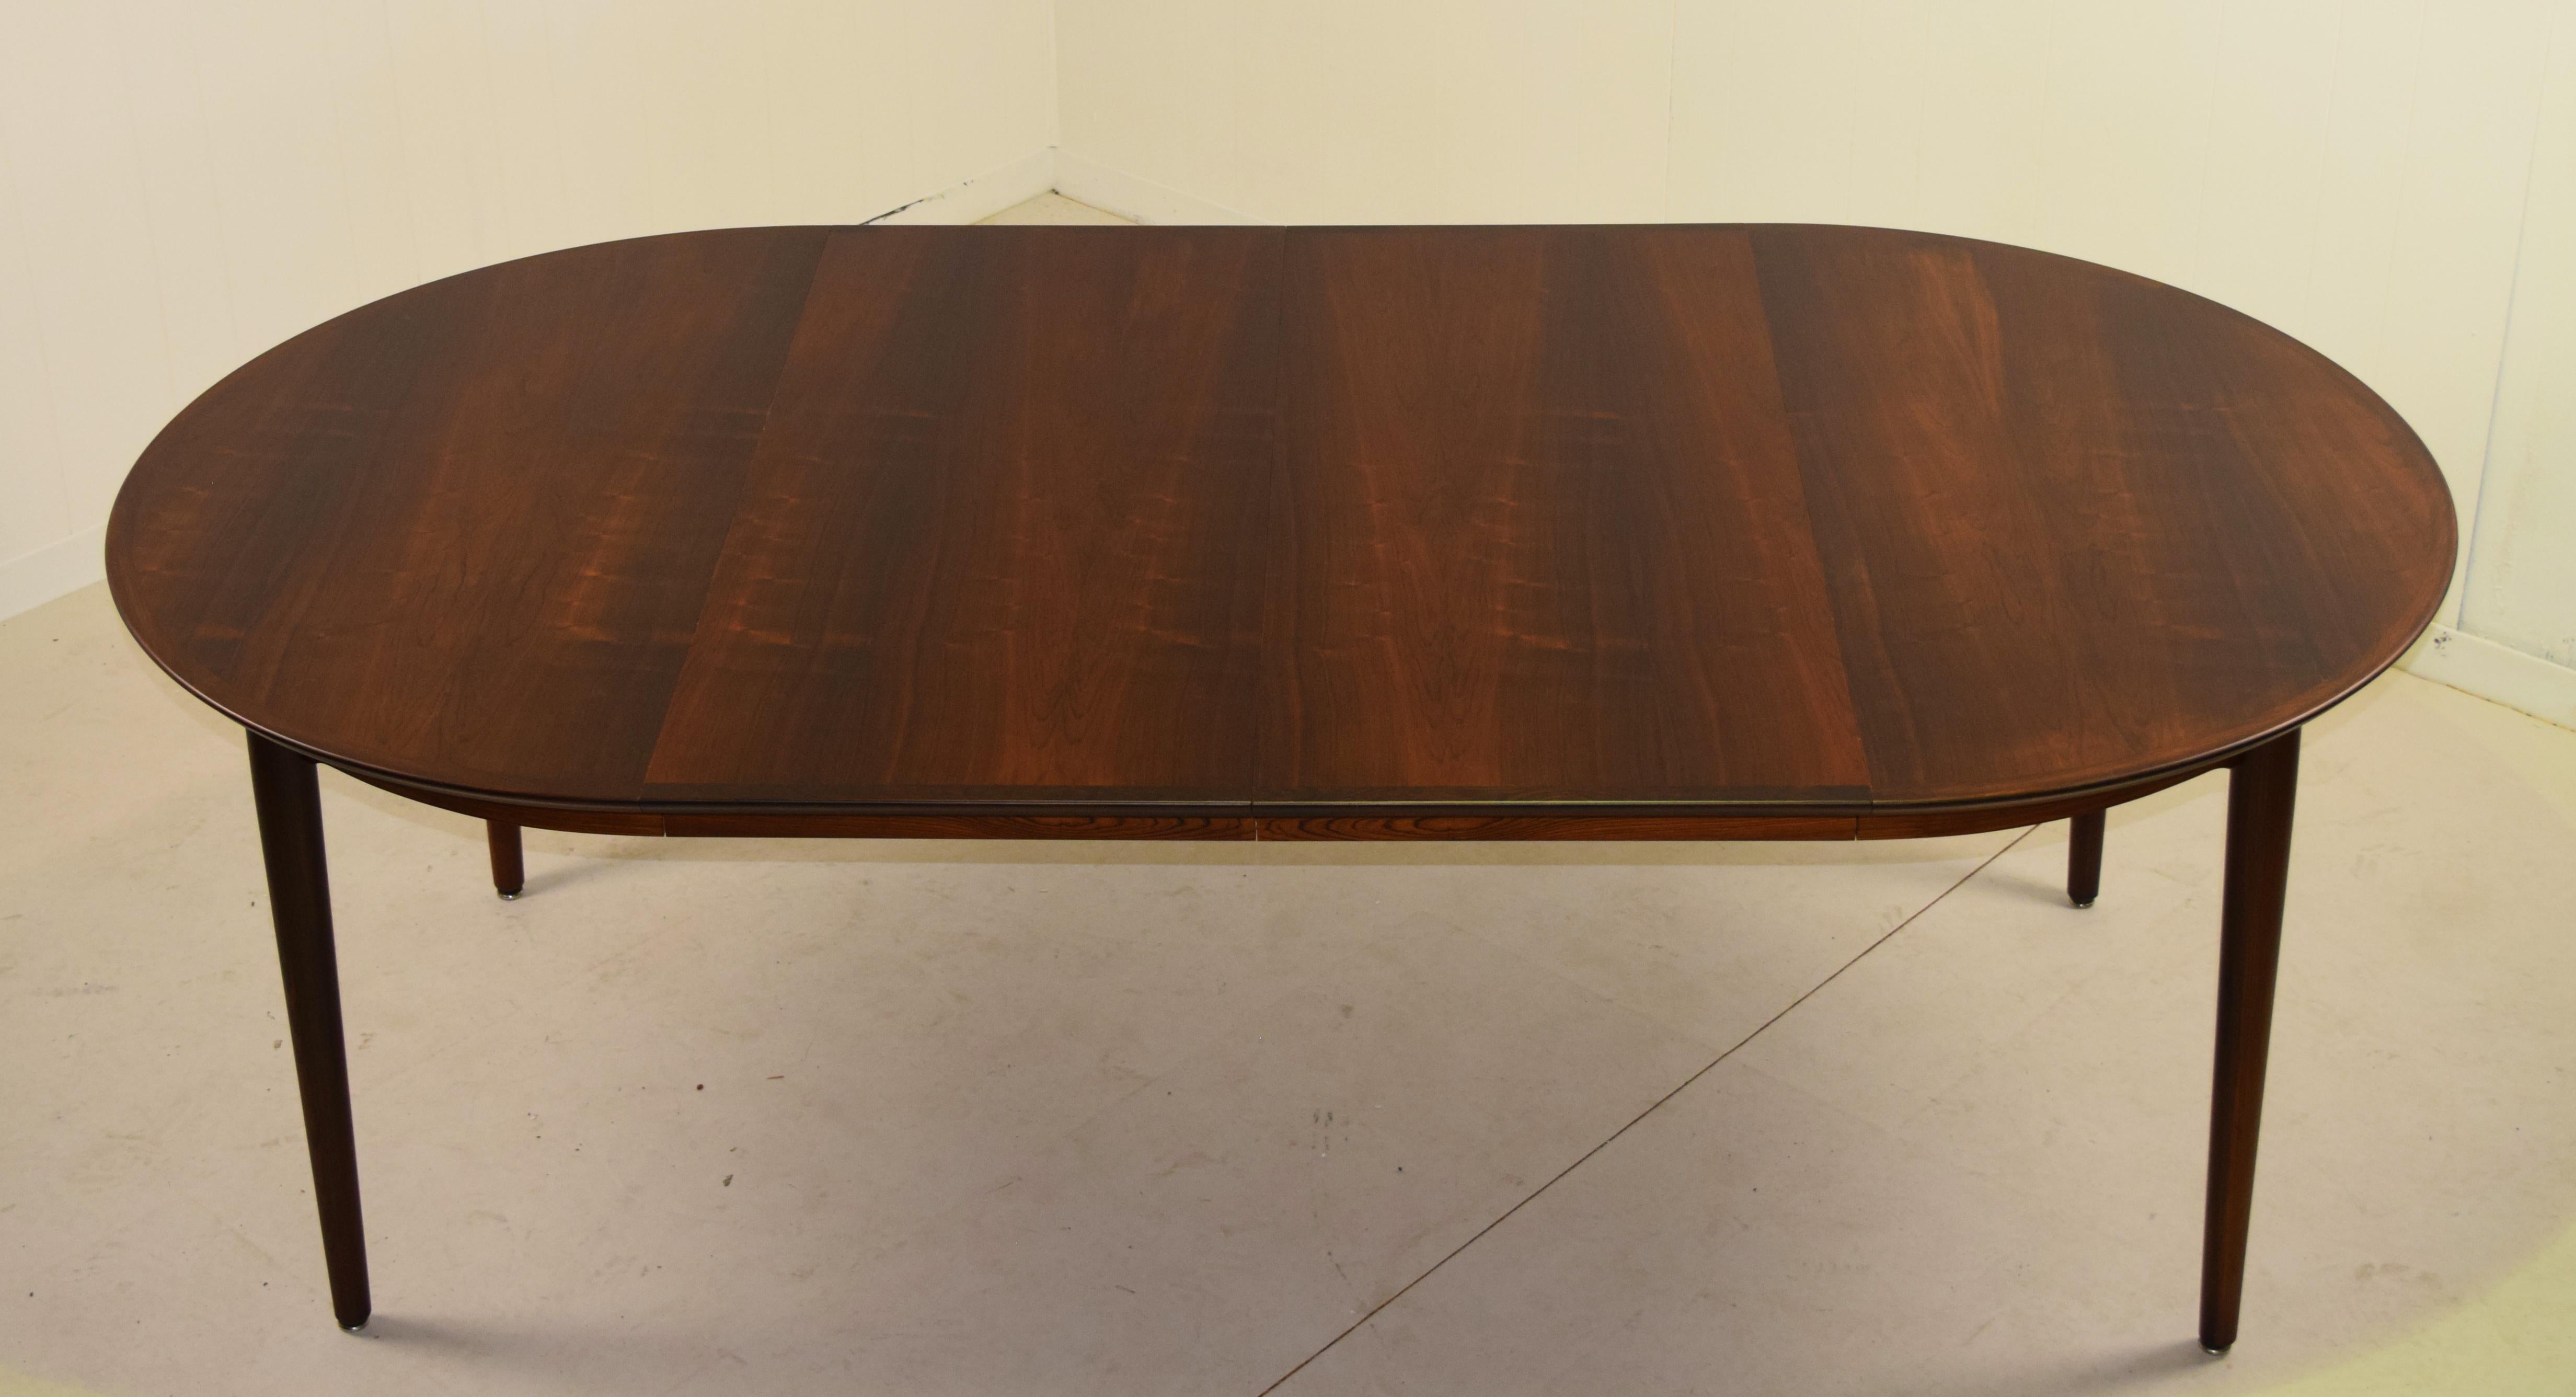 Rosewood with premium condition lacquered surface in outstanding condition. Measures 47